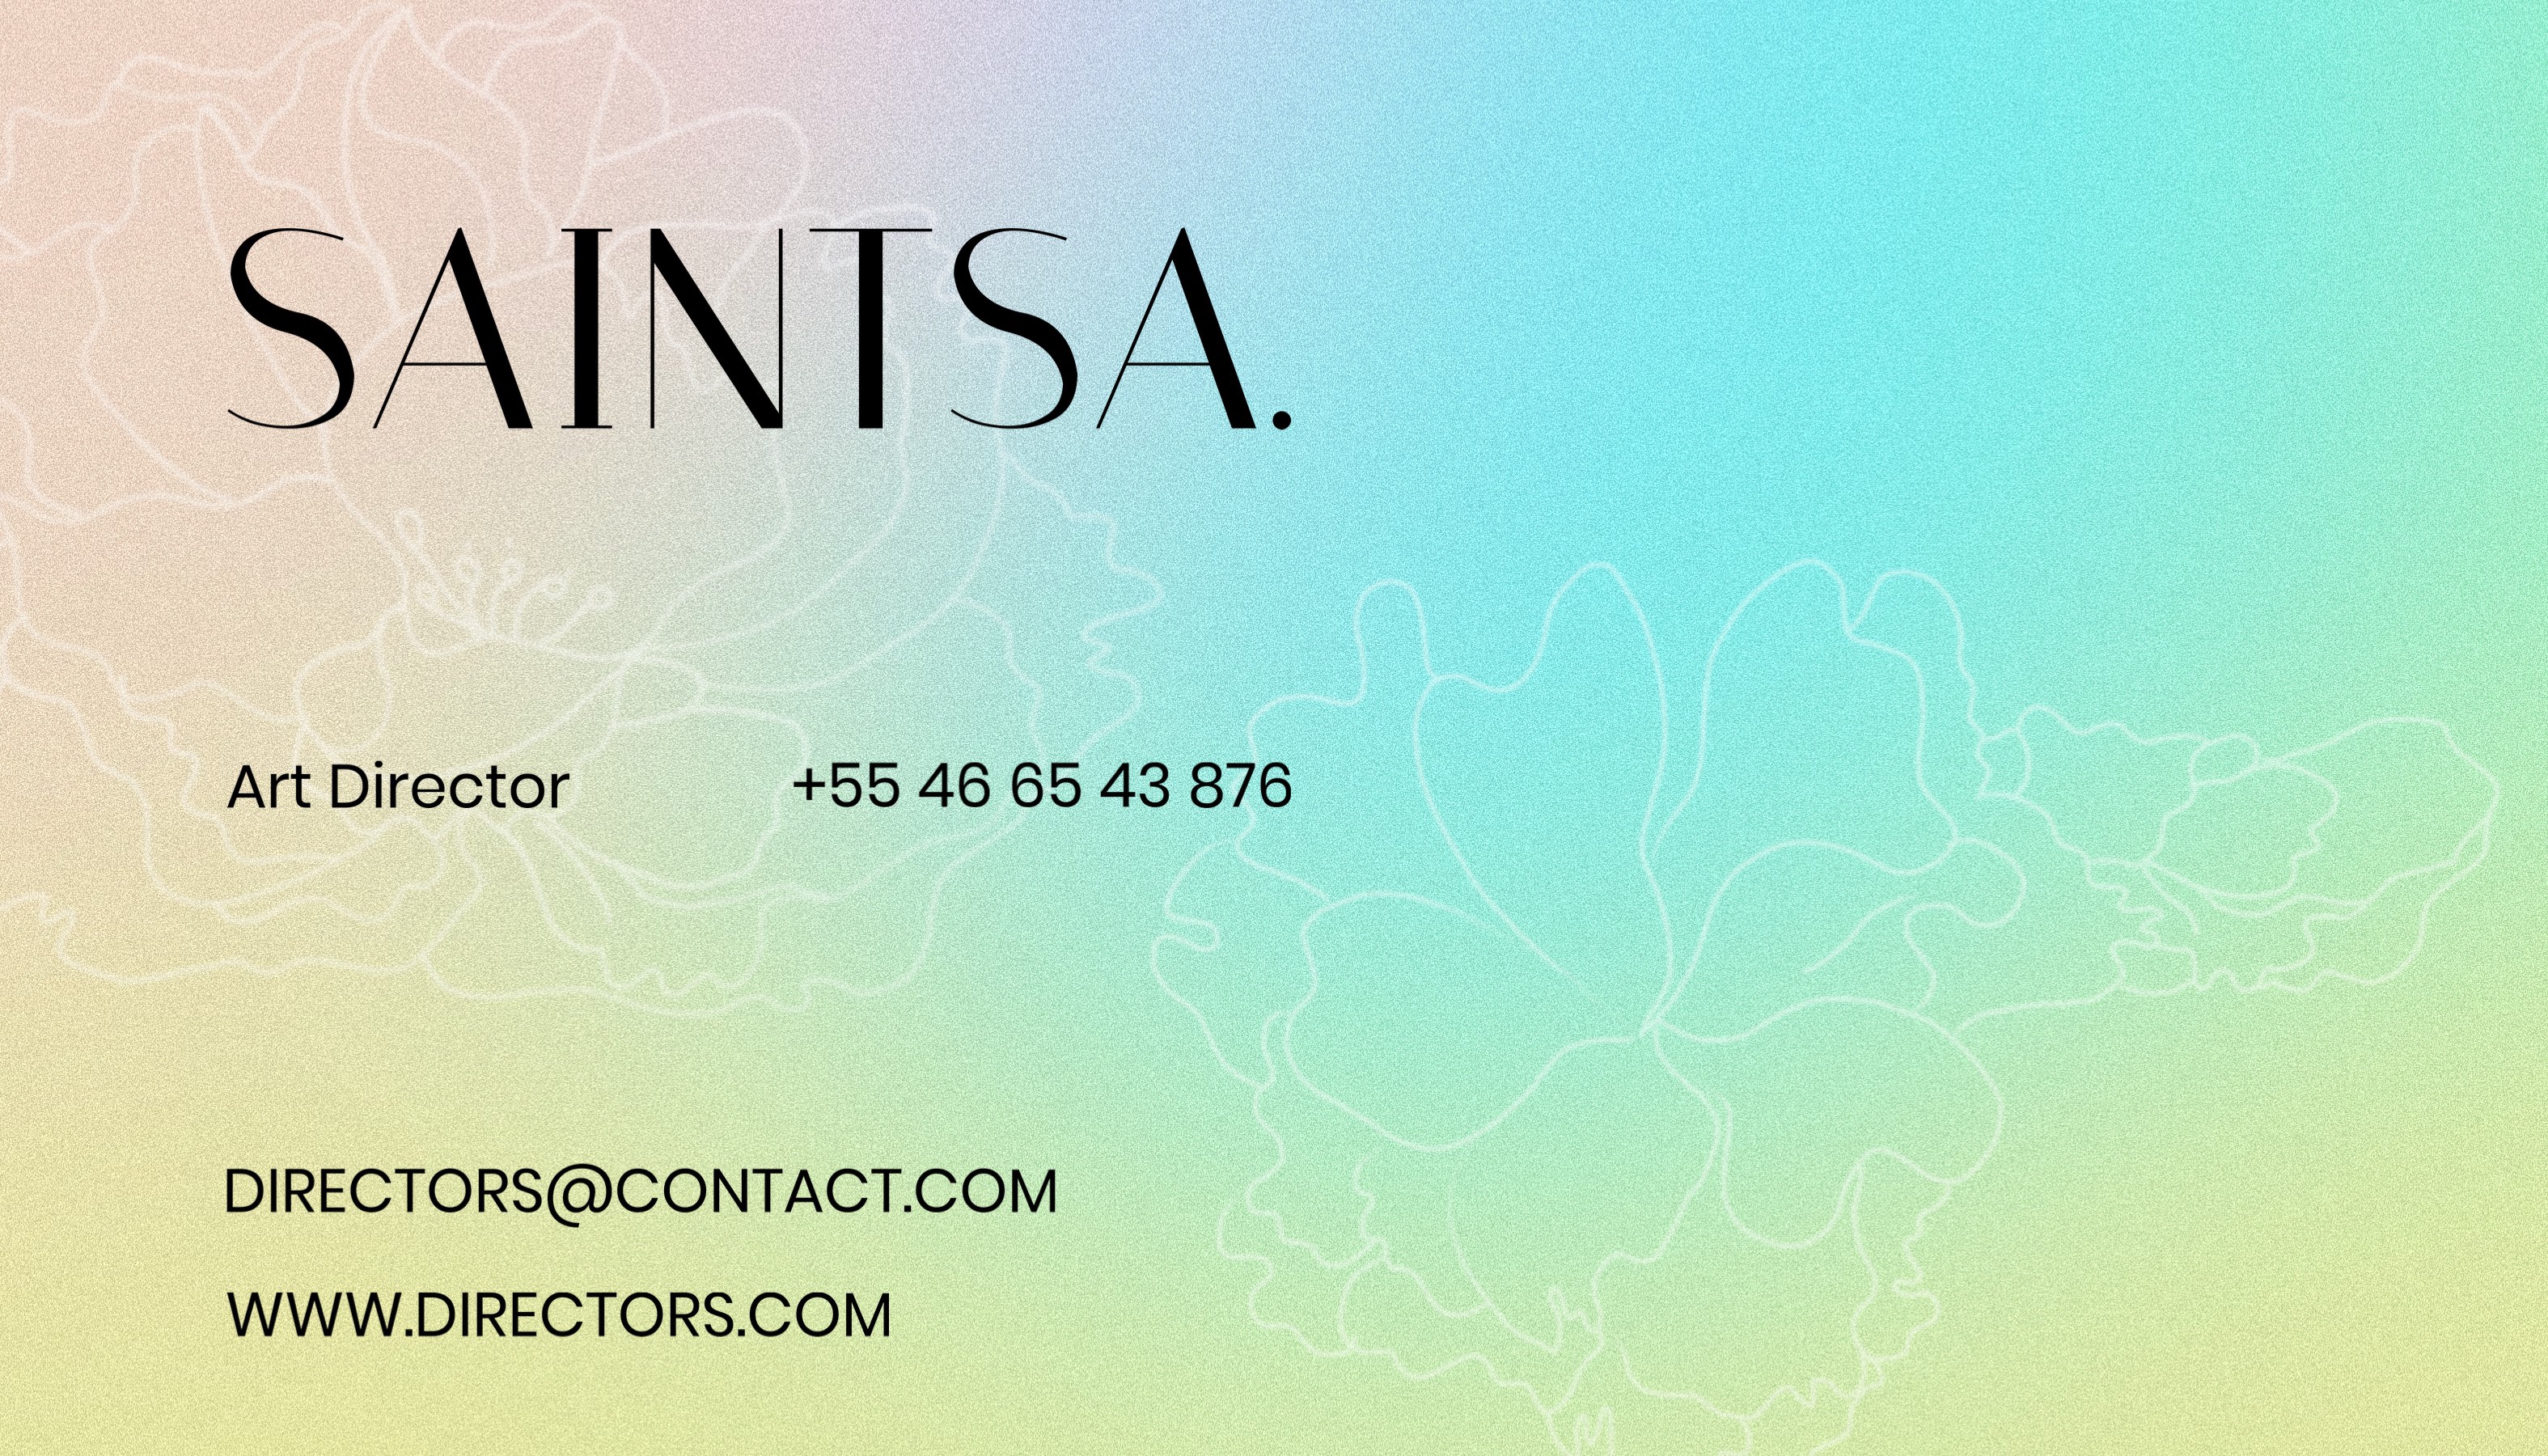 A Business Card With The Word Saintsa On It Business Card Template